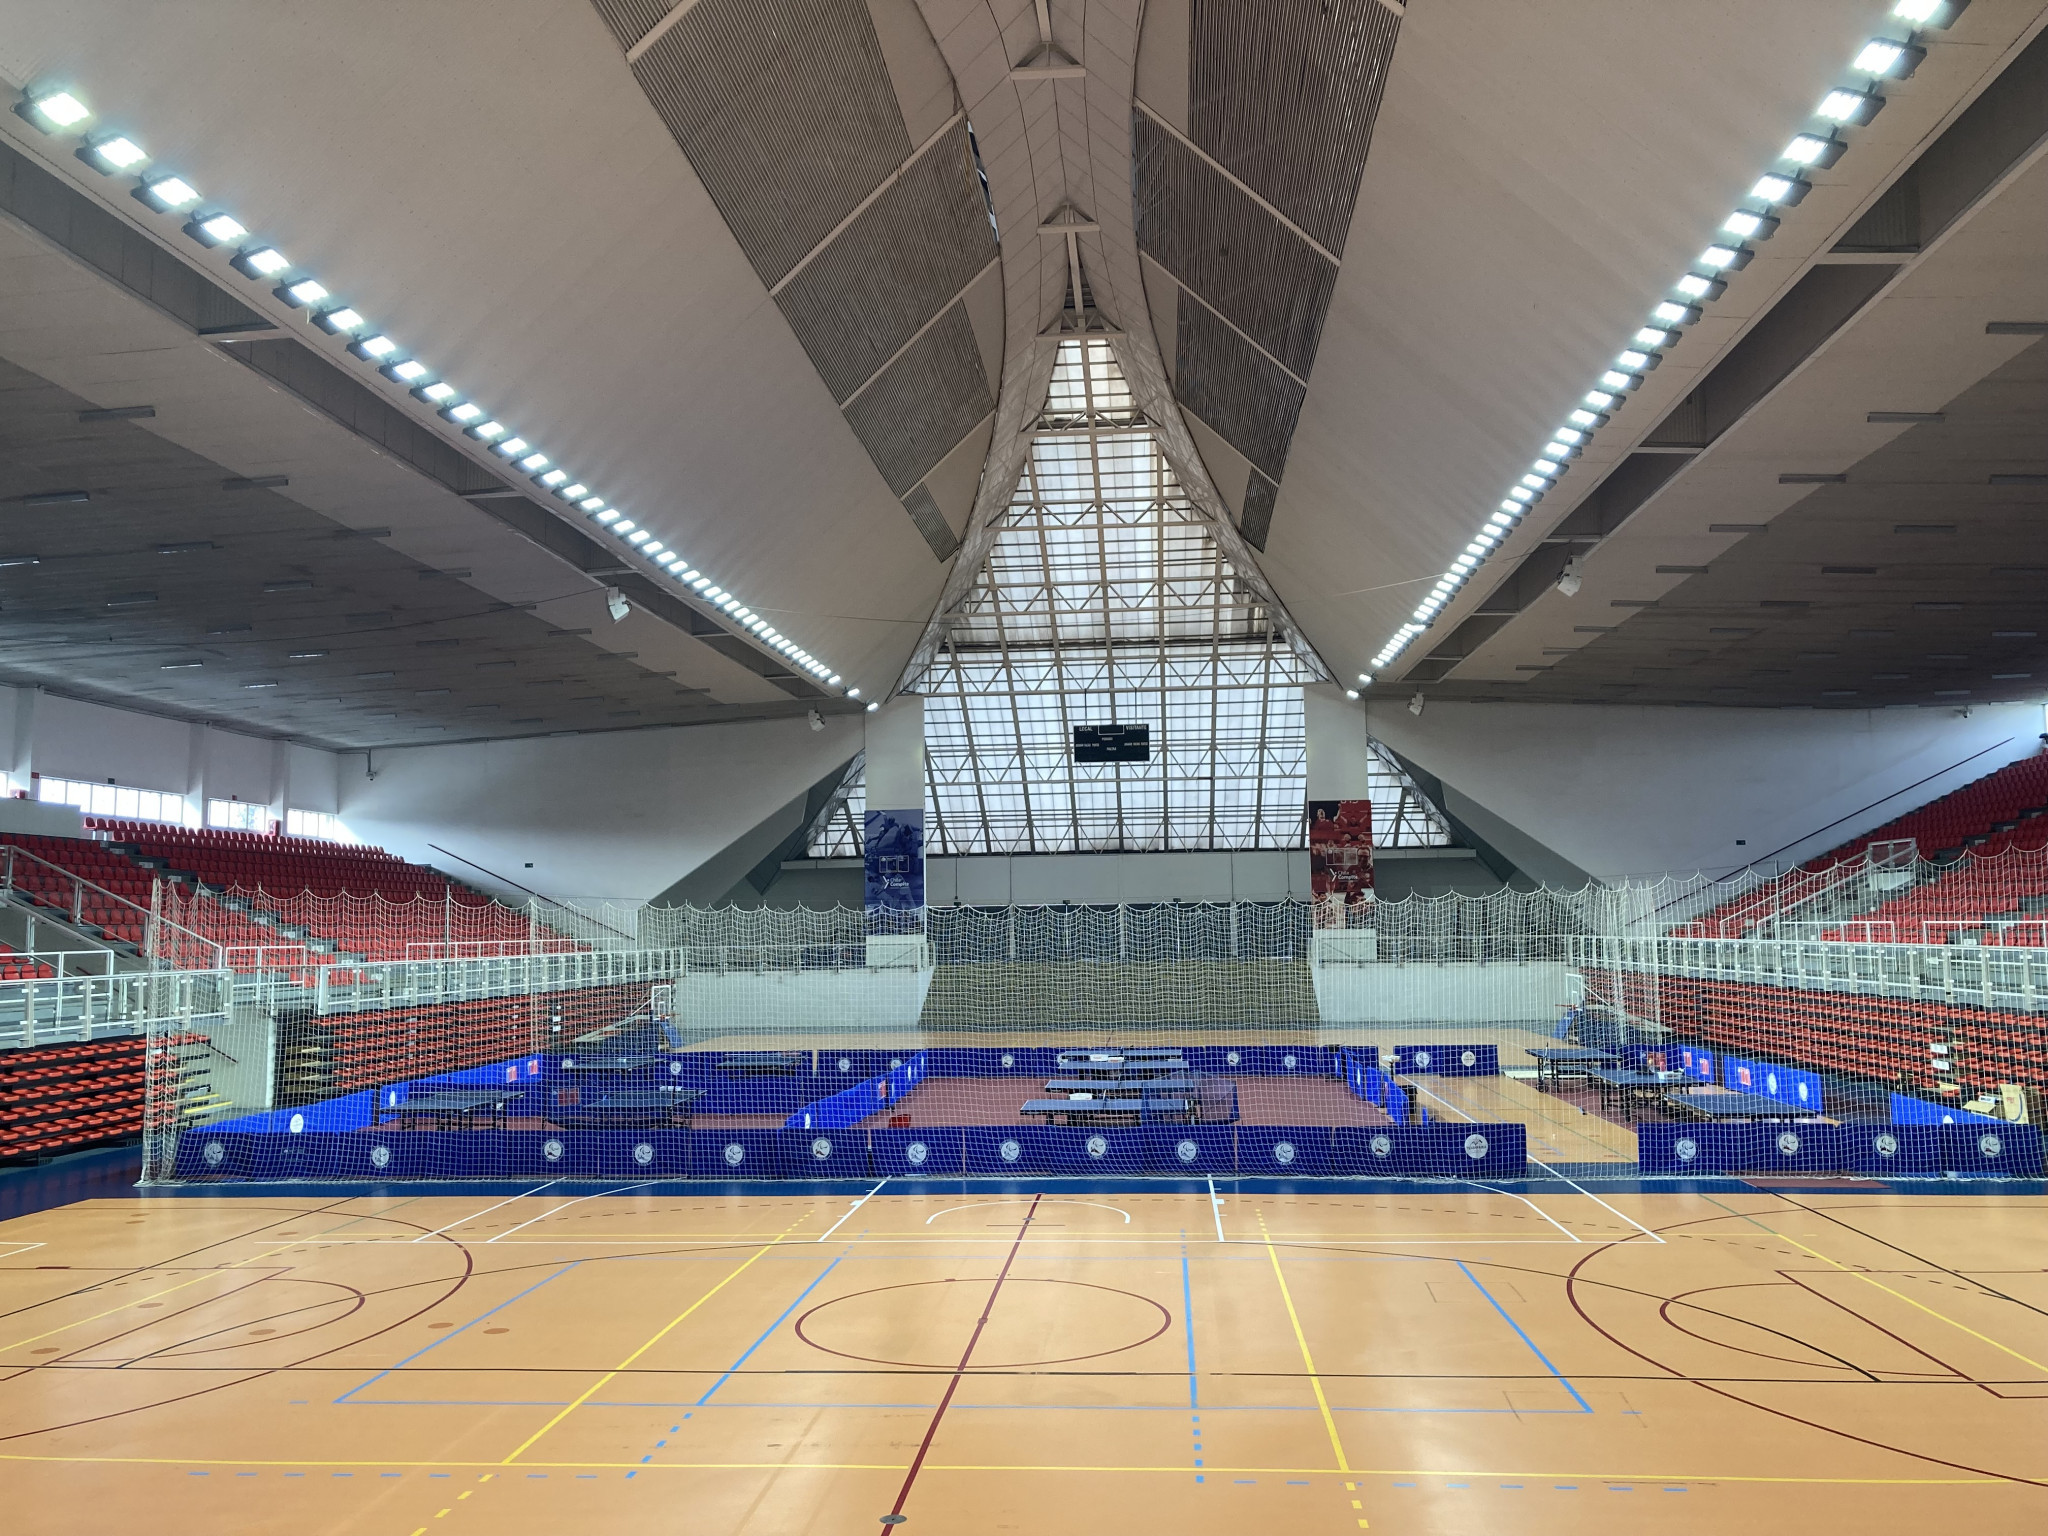 Almost 3,000 spectators are set to be able to pack into the Polideportivo which is due to stage basketball and wheelchair basketball competitions ©ITG